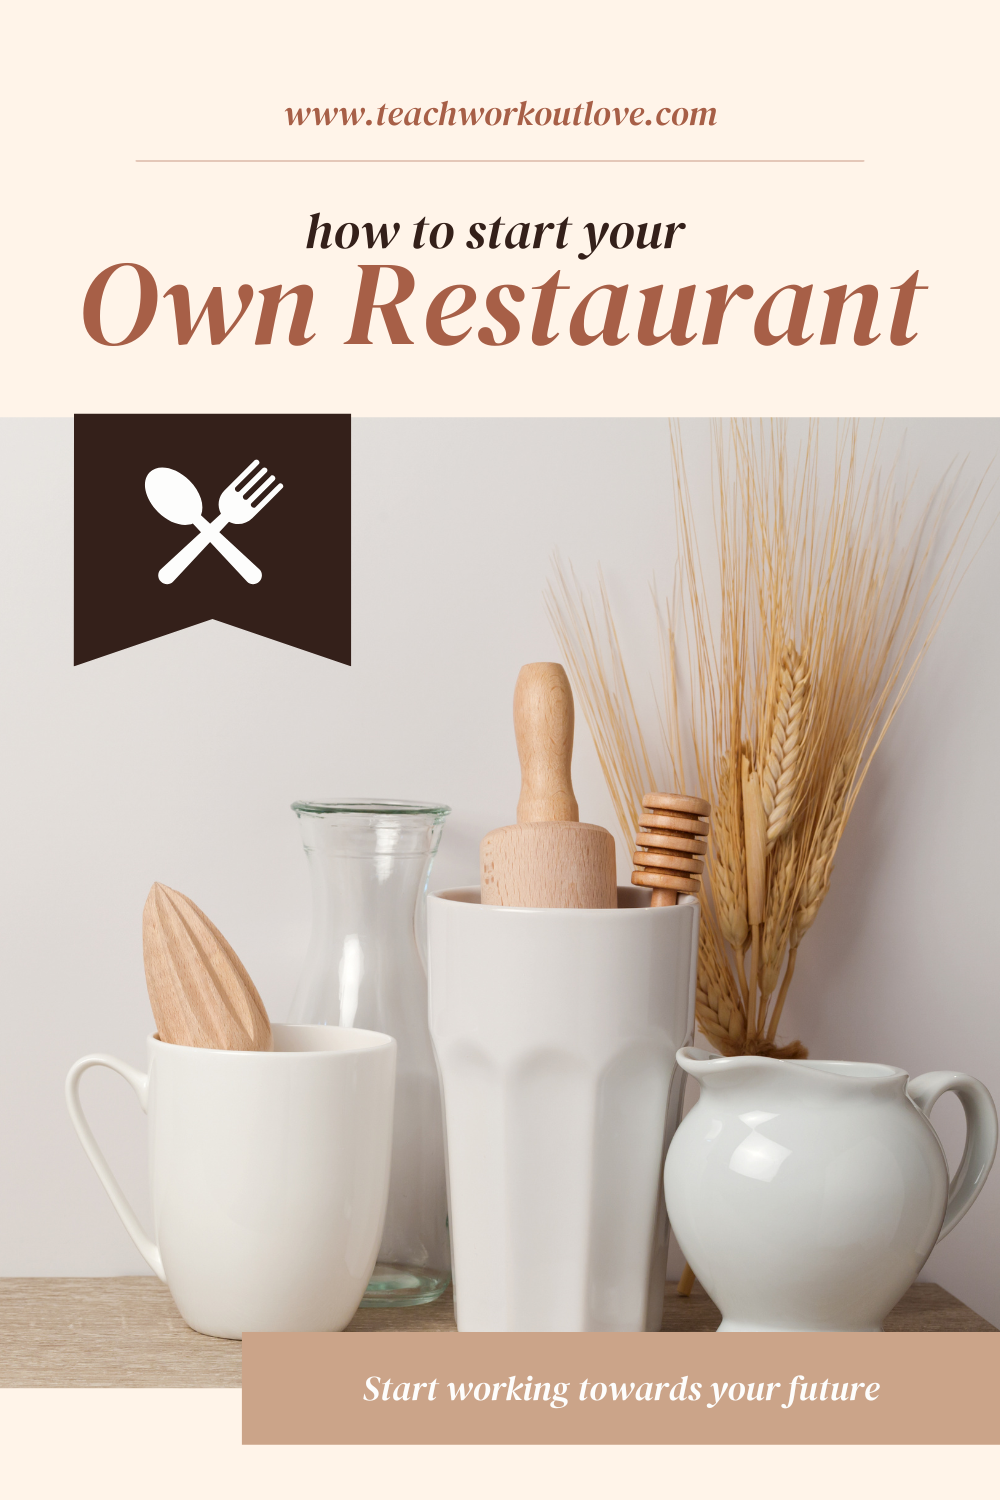 If you are a true food lover and you have always wanted to run your own business, then the obvious solution is to start your own restaurant. Here's some tips.